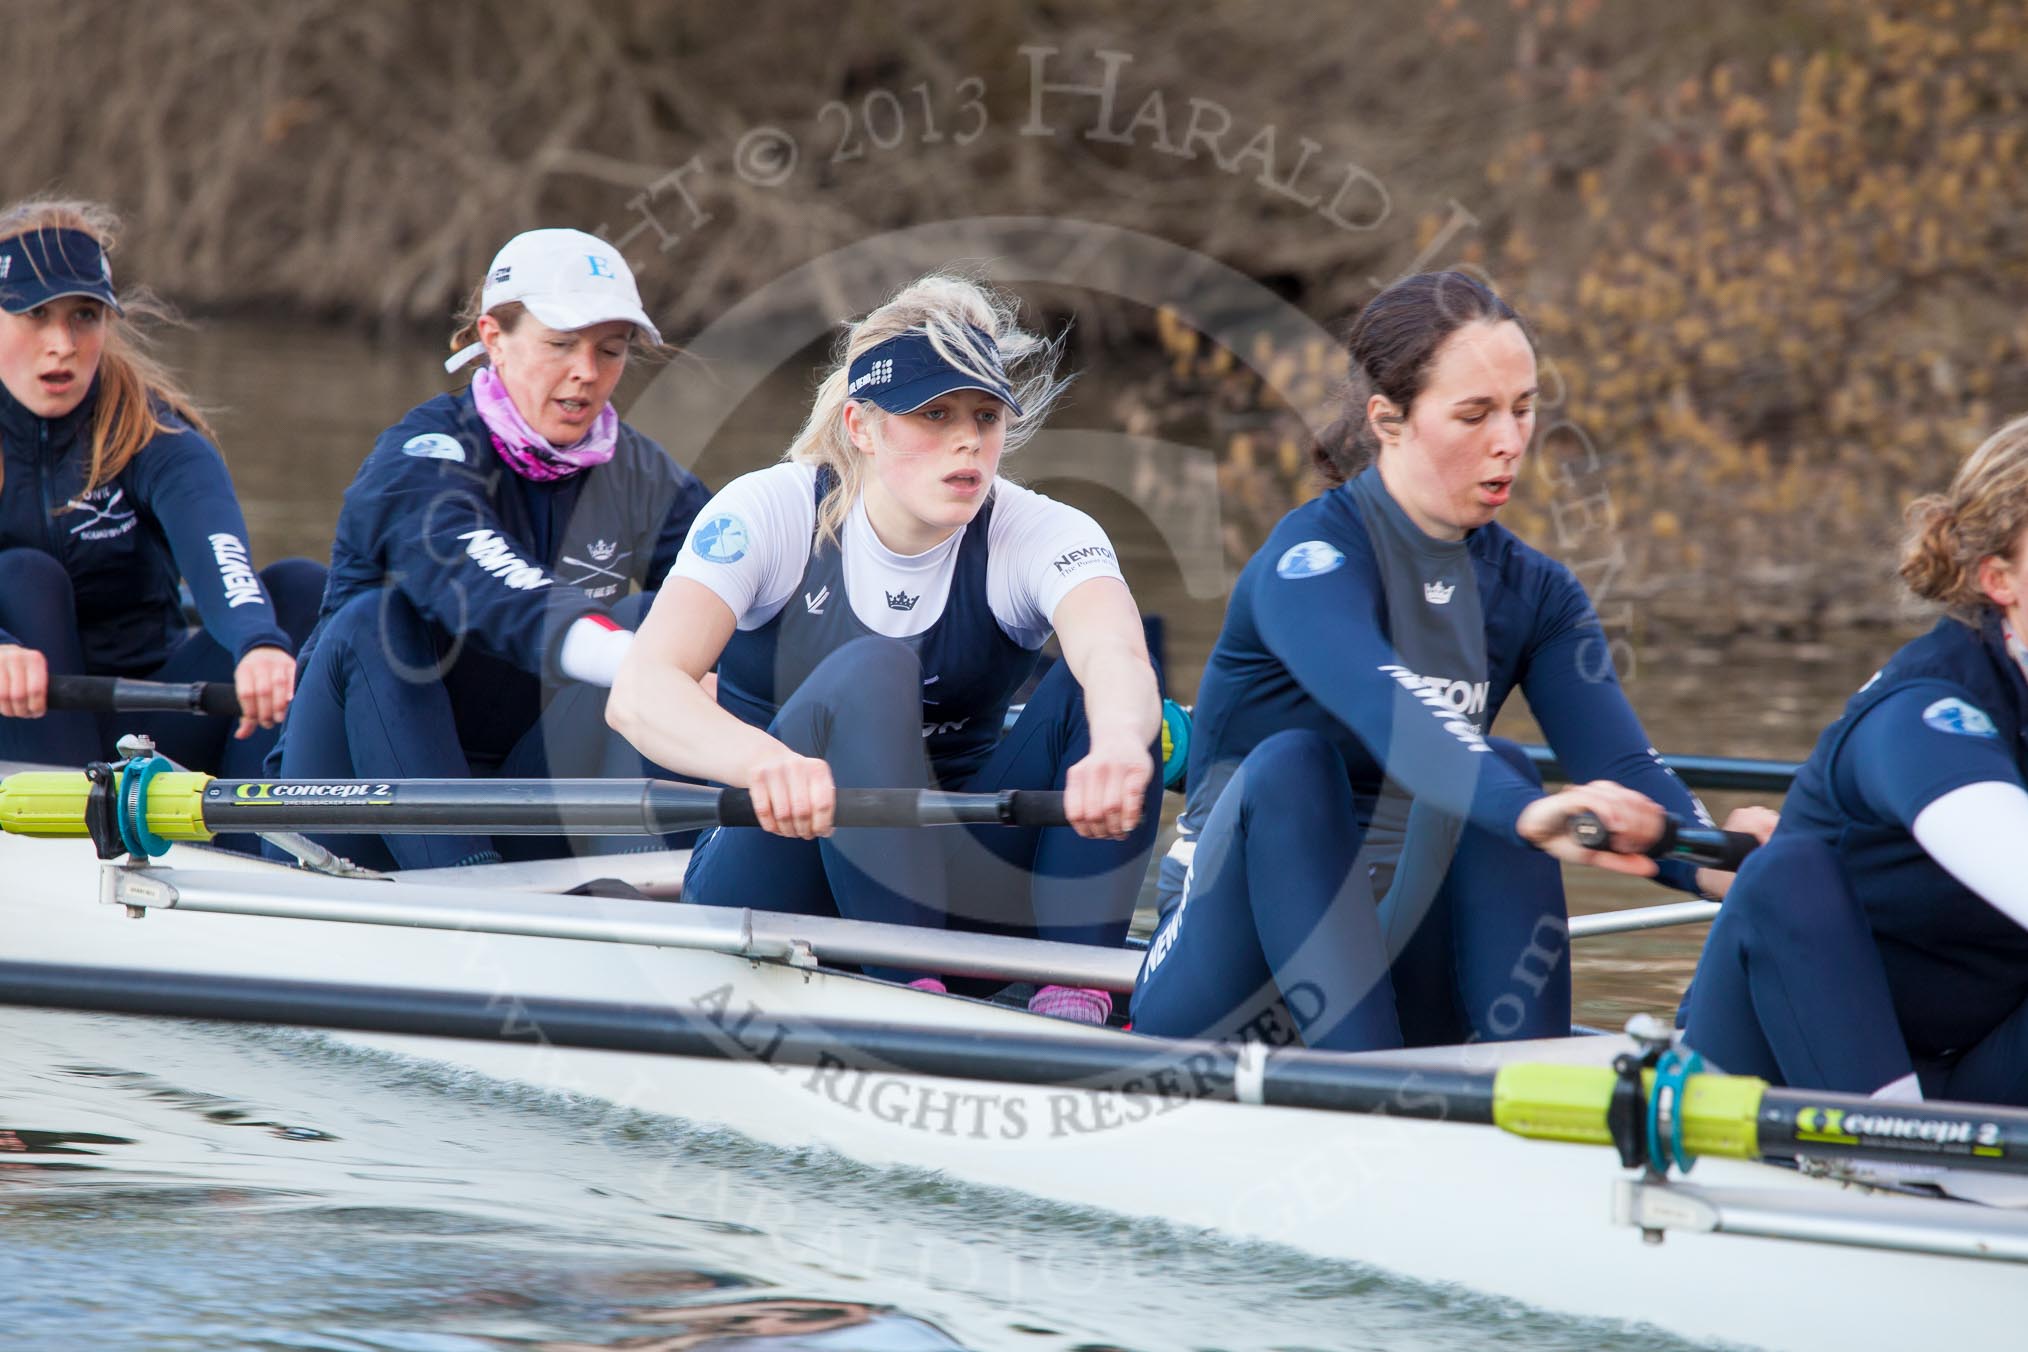 The Boat Race season 2013 - OUWBC training: In the OUWBC Blue Boat 3 seat Mary Foord-Weston, Jo Lee, Amy Varney, Harriet Keane, and 7 seat Anastasia Chitty..
River Thames,
Wallingford,
Oxfordshire,
United Kingdom,
on 13 March 2013 at 17:13, image #107